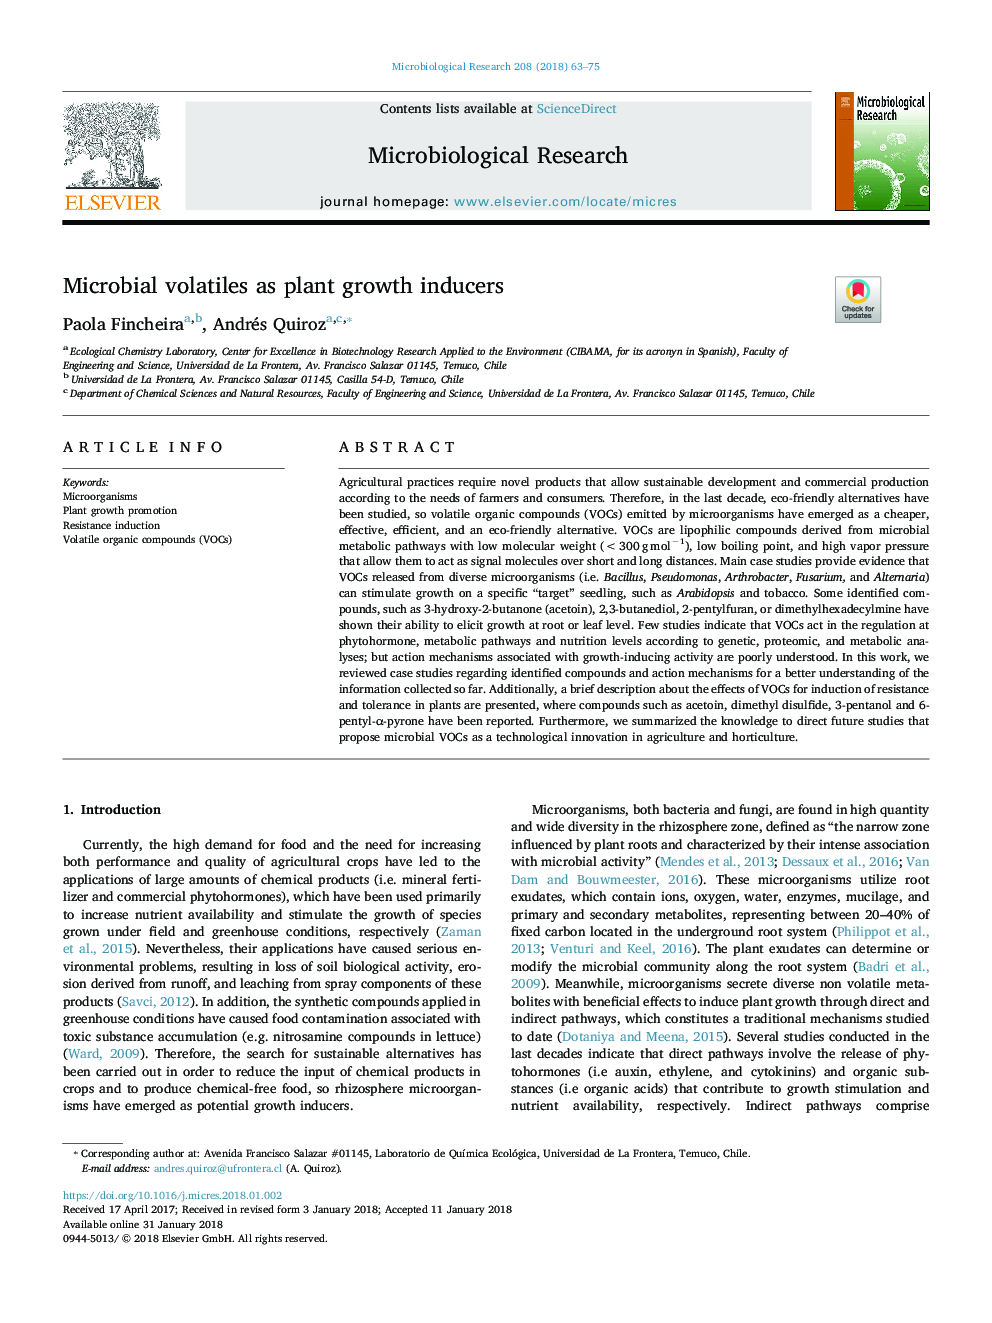 Microbial volatiles as plant growth inducers